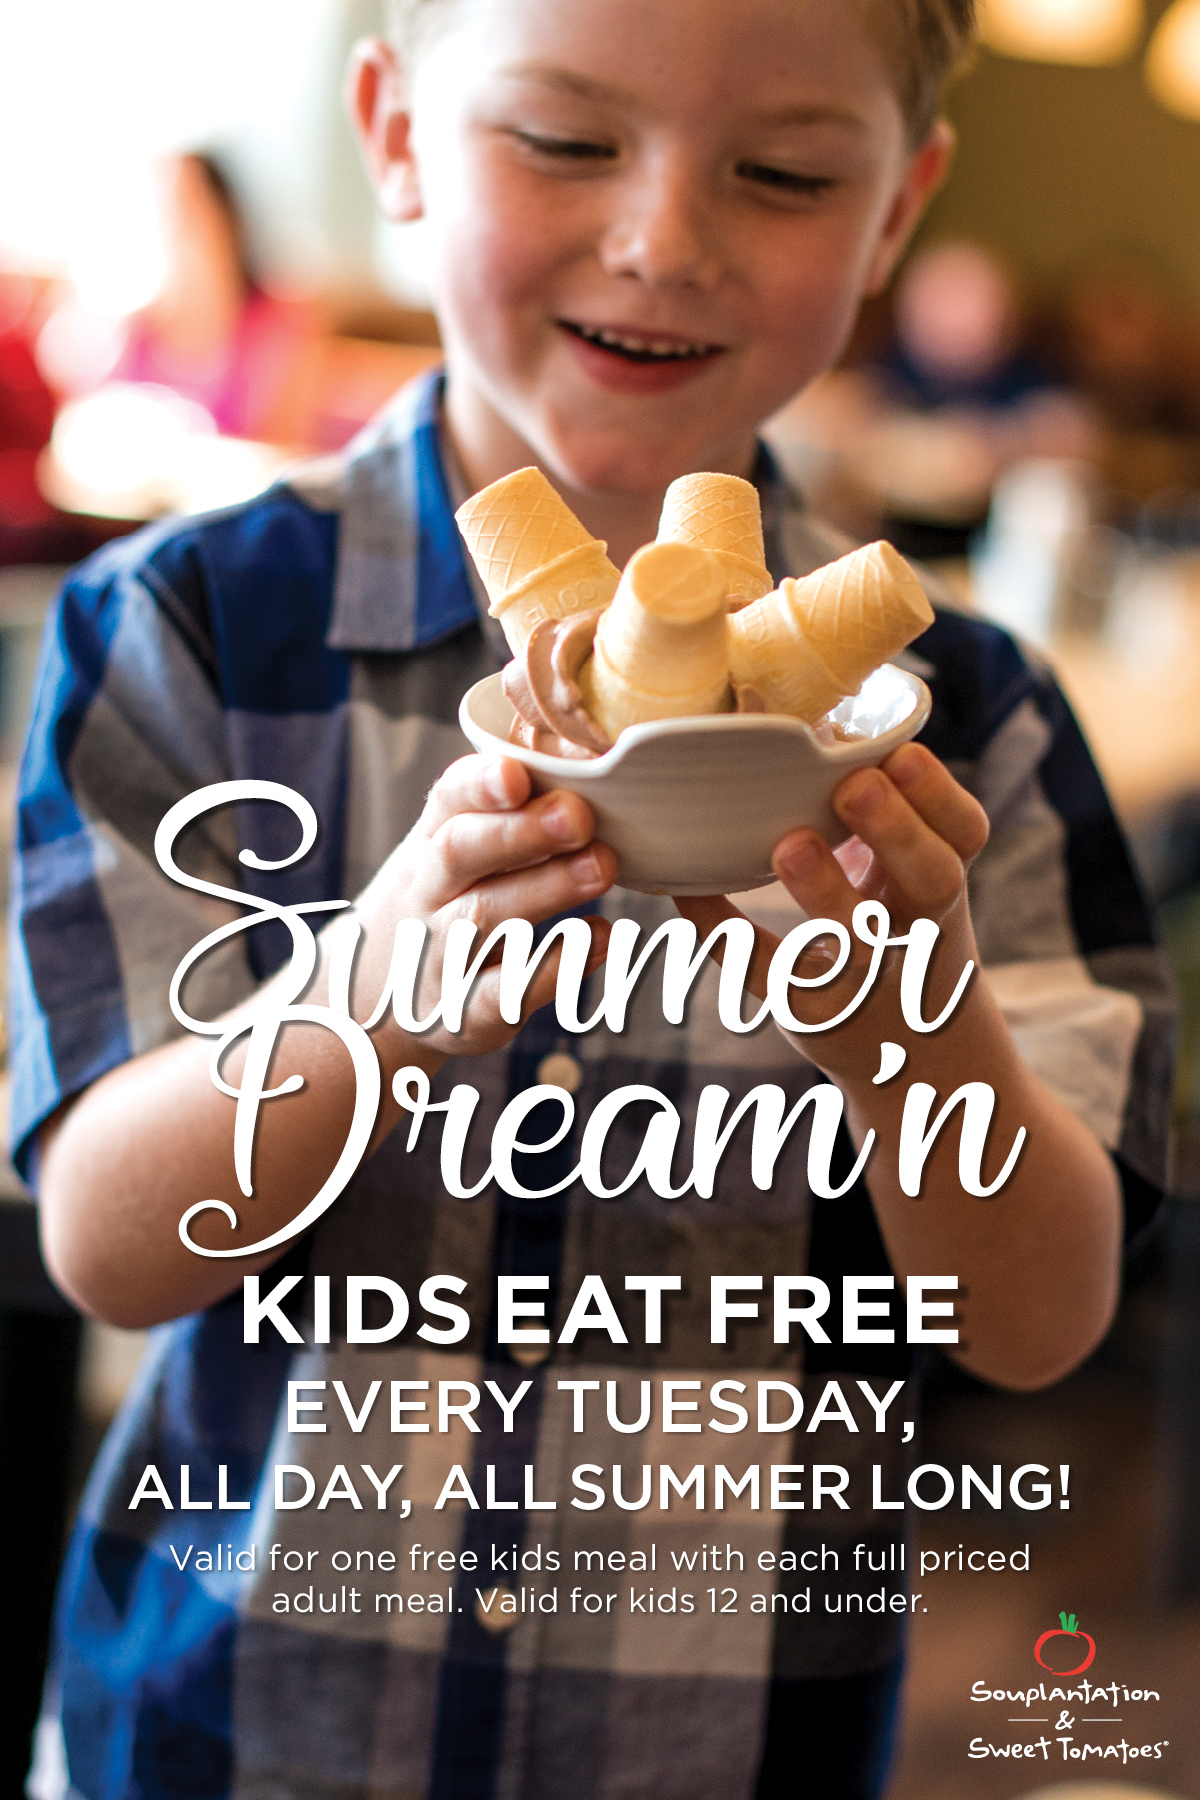 Kids Eat Free on Tuesdays all Summer Long at Sweet Tomatoes #Free 